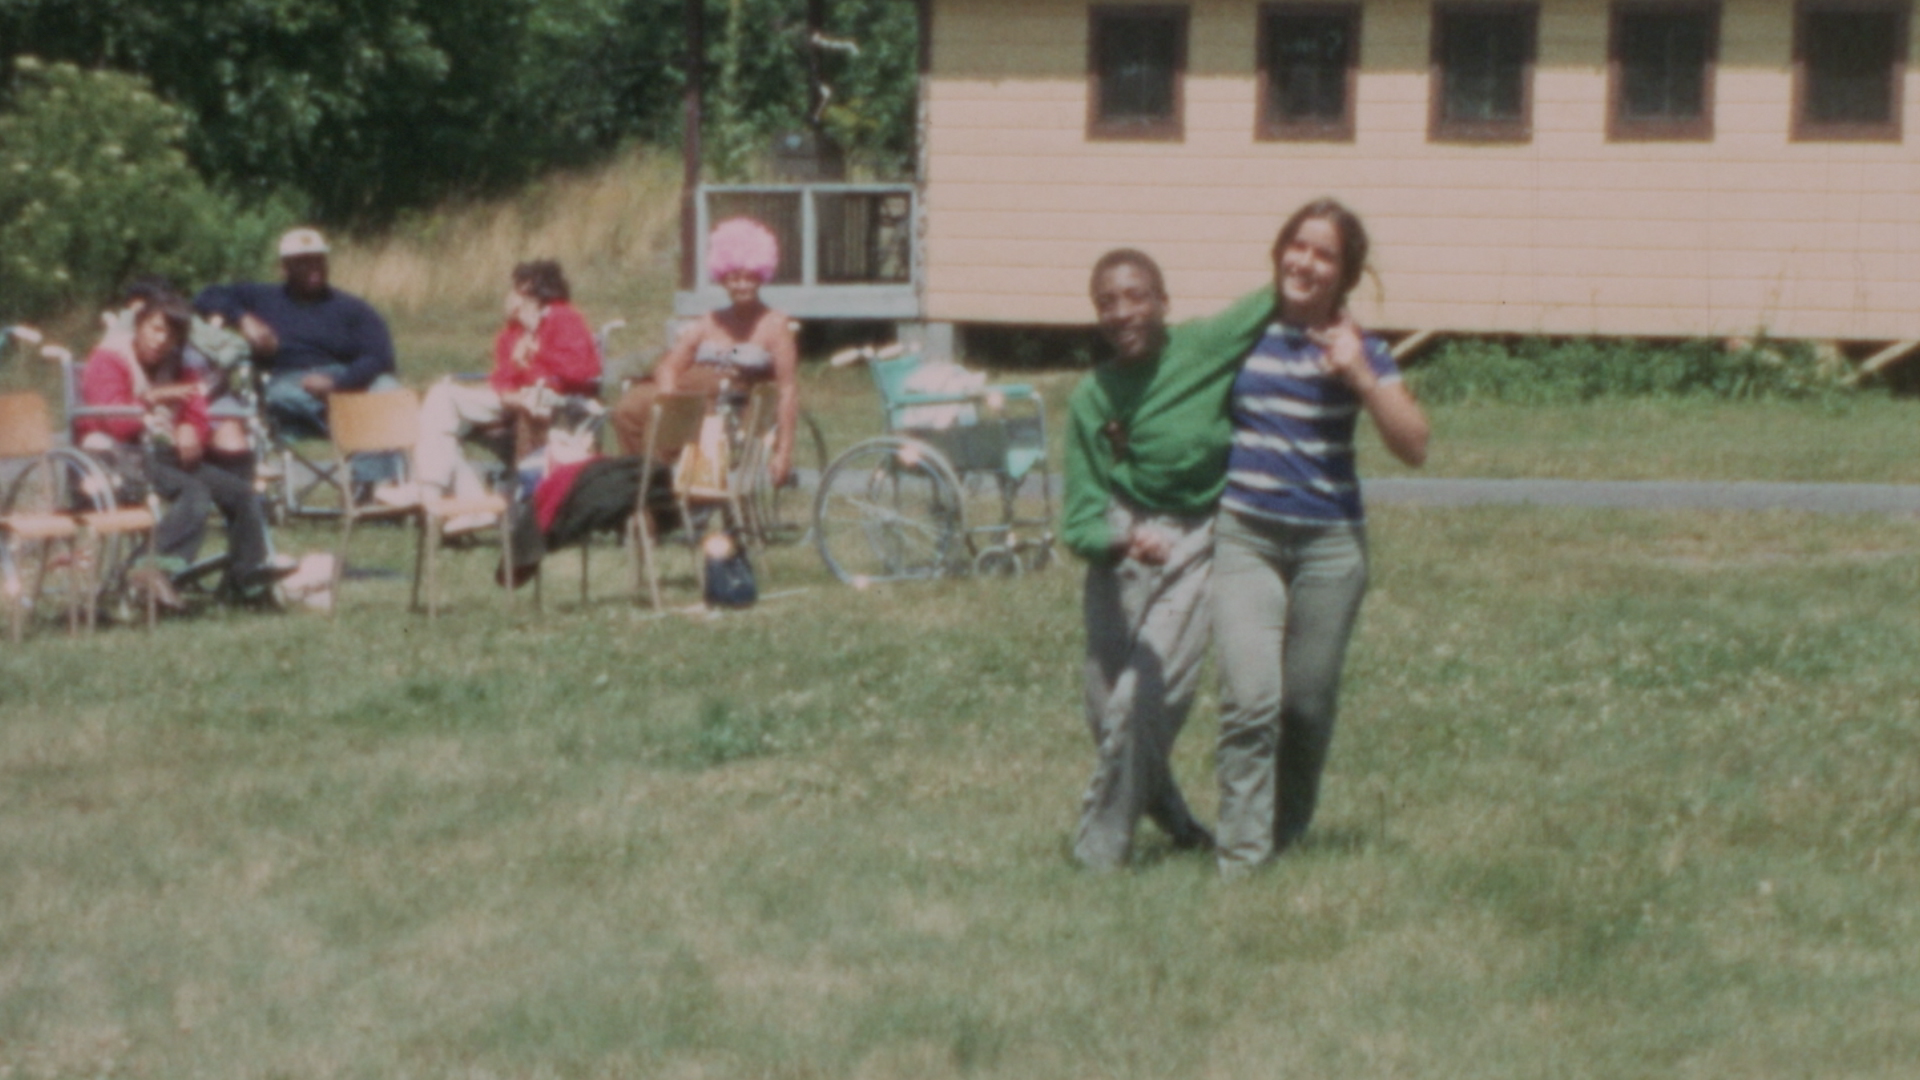 "Crip Camp" is the true story of Camp Jened in the 1960s, a haven for young people with disabilities that led them to organize and demand a more accessible world.